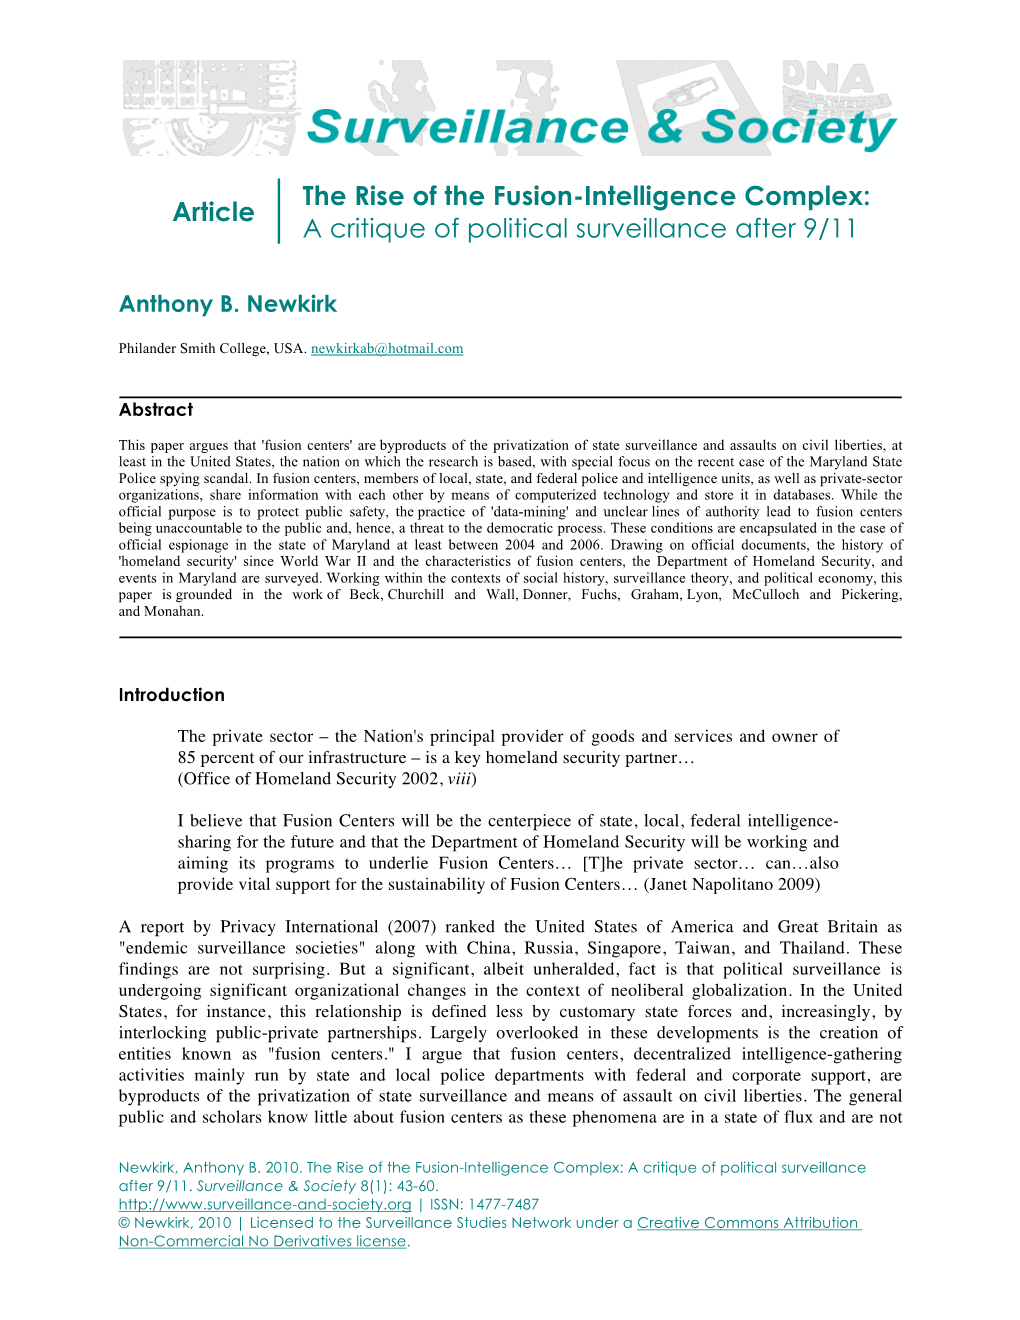 Article the Rise of the Fusion-Intelligence Complex: A